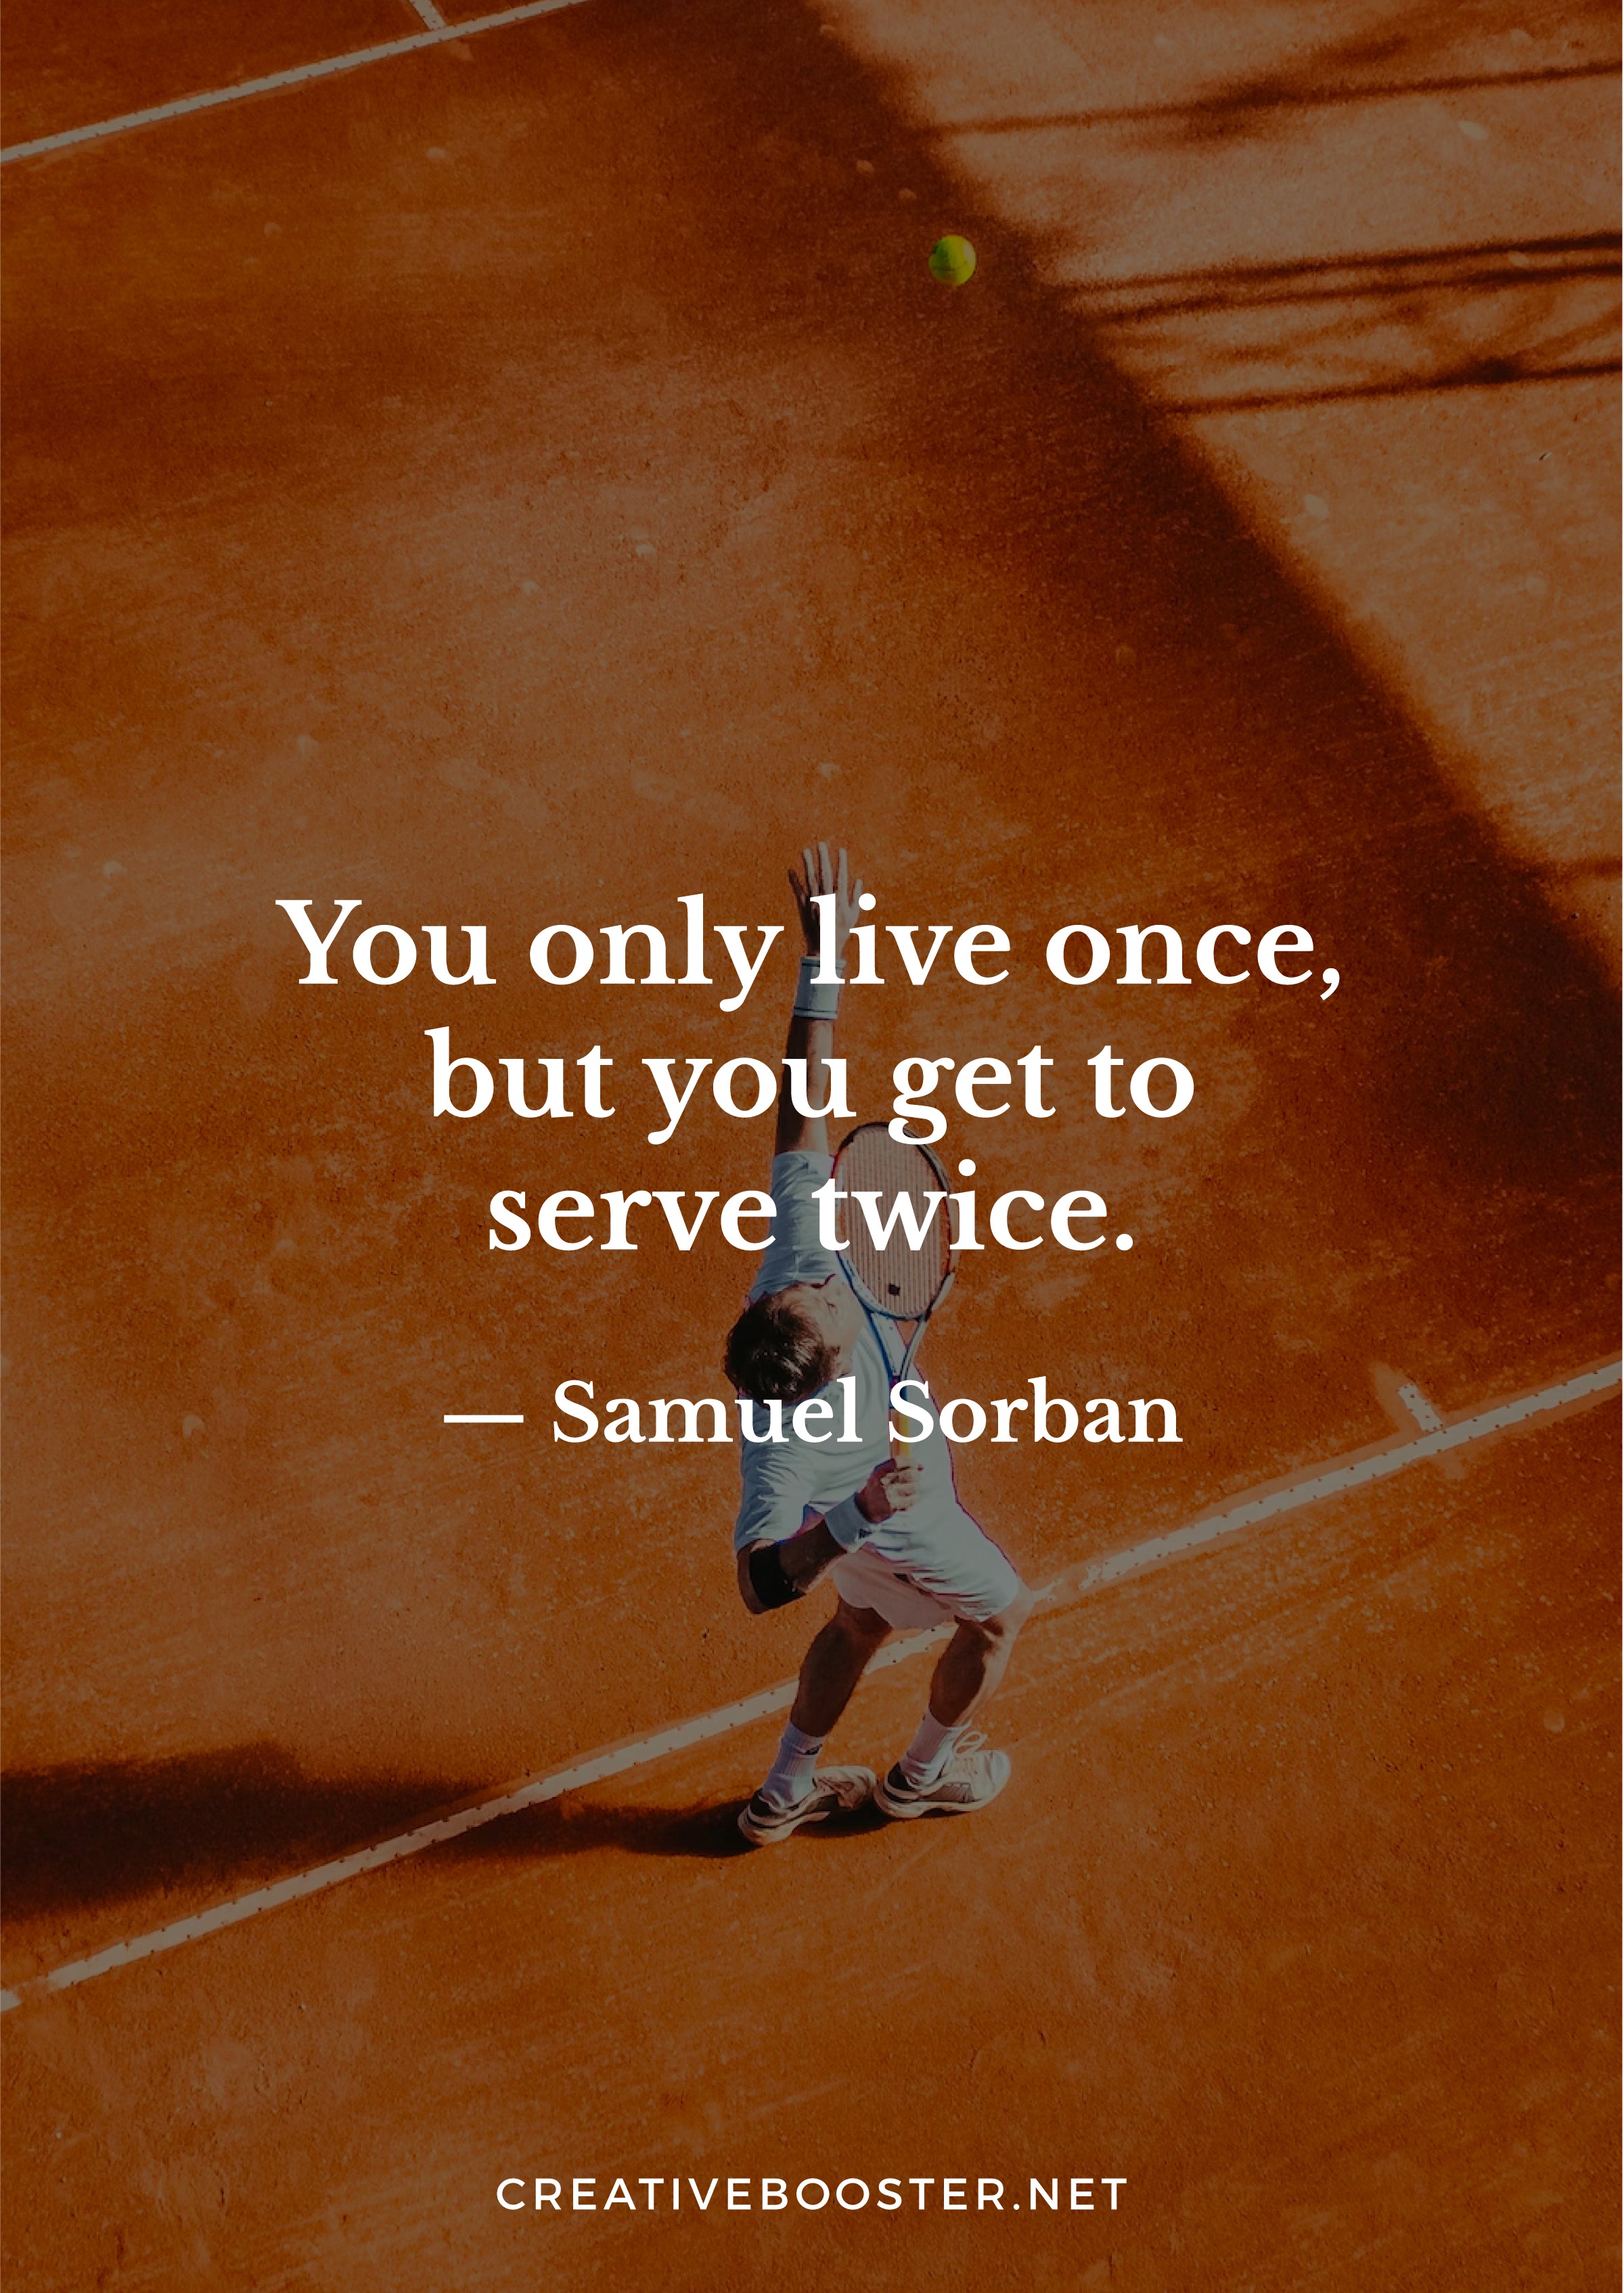 "You only live once, but you get to serve twice." - Samuel Sorban